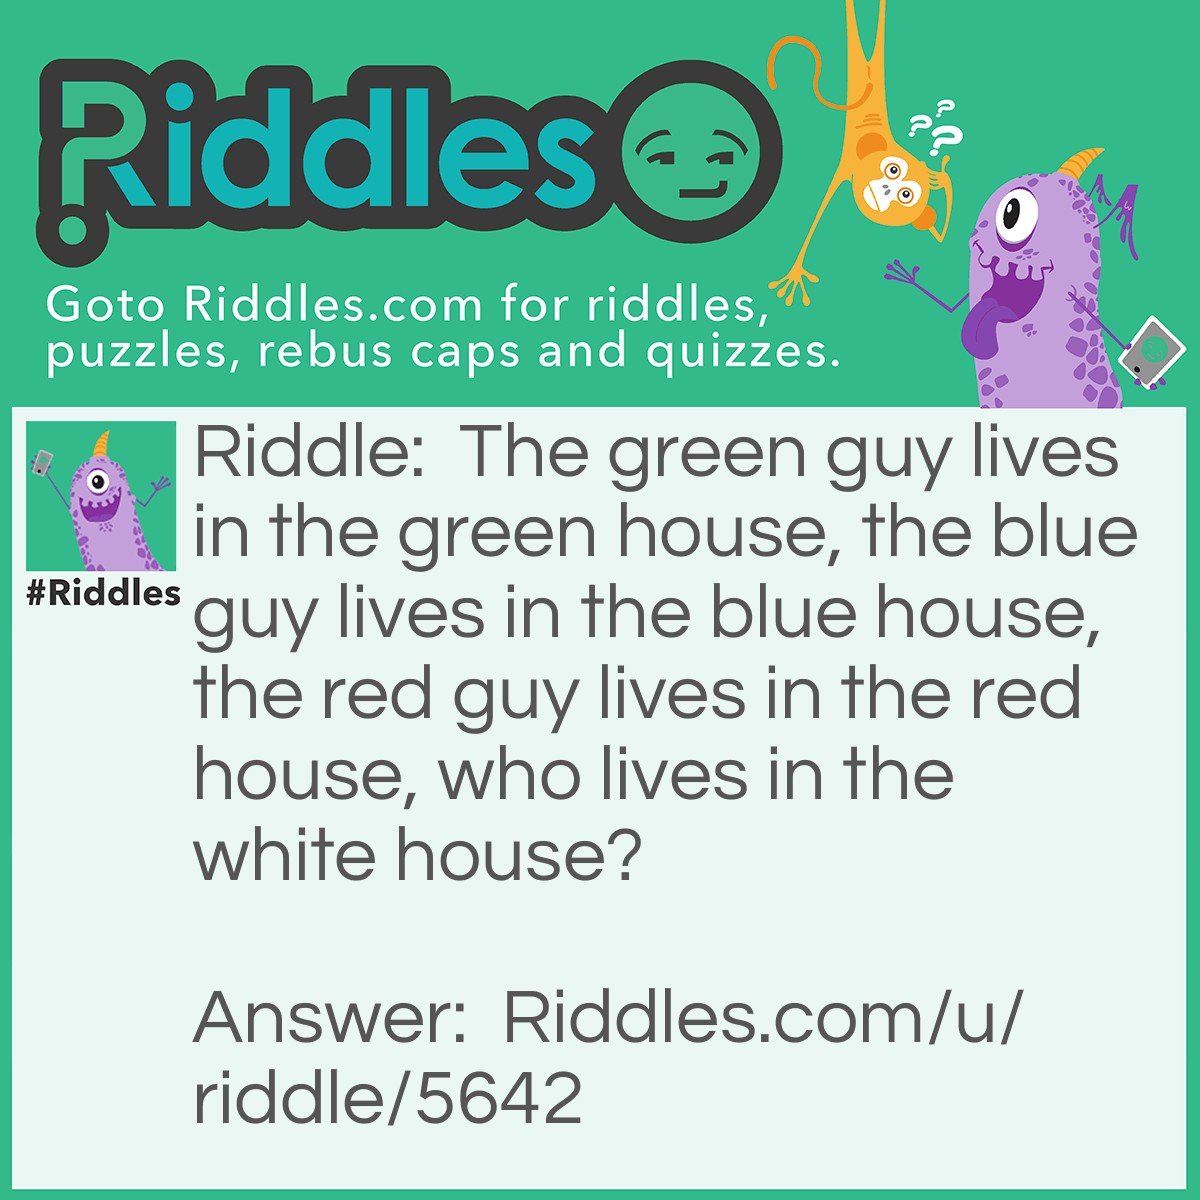 Riddle: The green guy lives in the green house, the blue guy lives in the blue house, the red guy lives in the red house, who lives in the white house? Answer: The president.